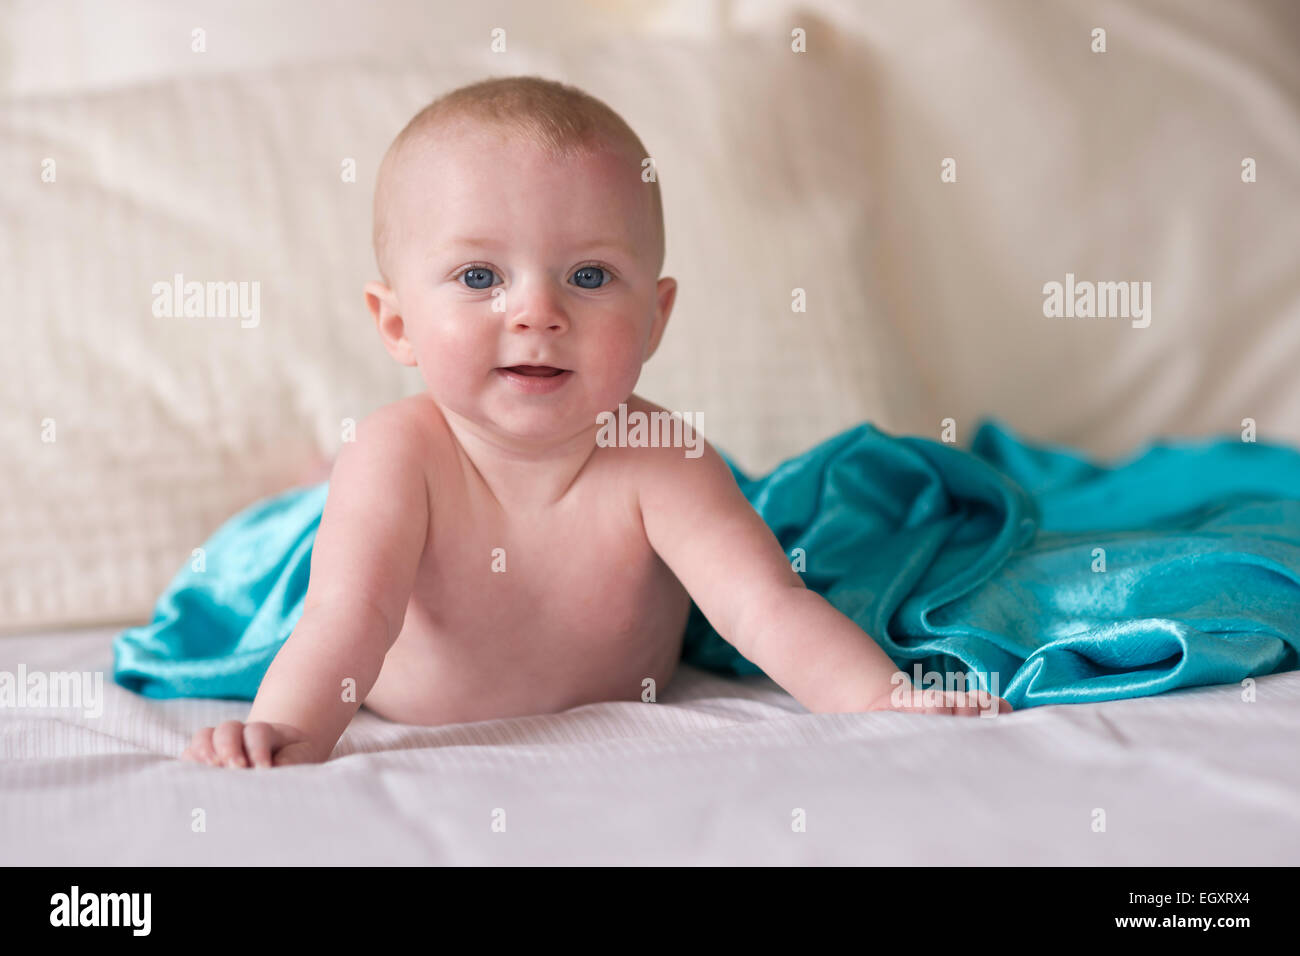 Sweet innocent young infant boy crawls around on the bed Stock Photo